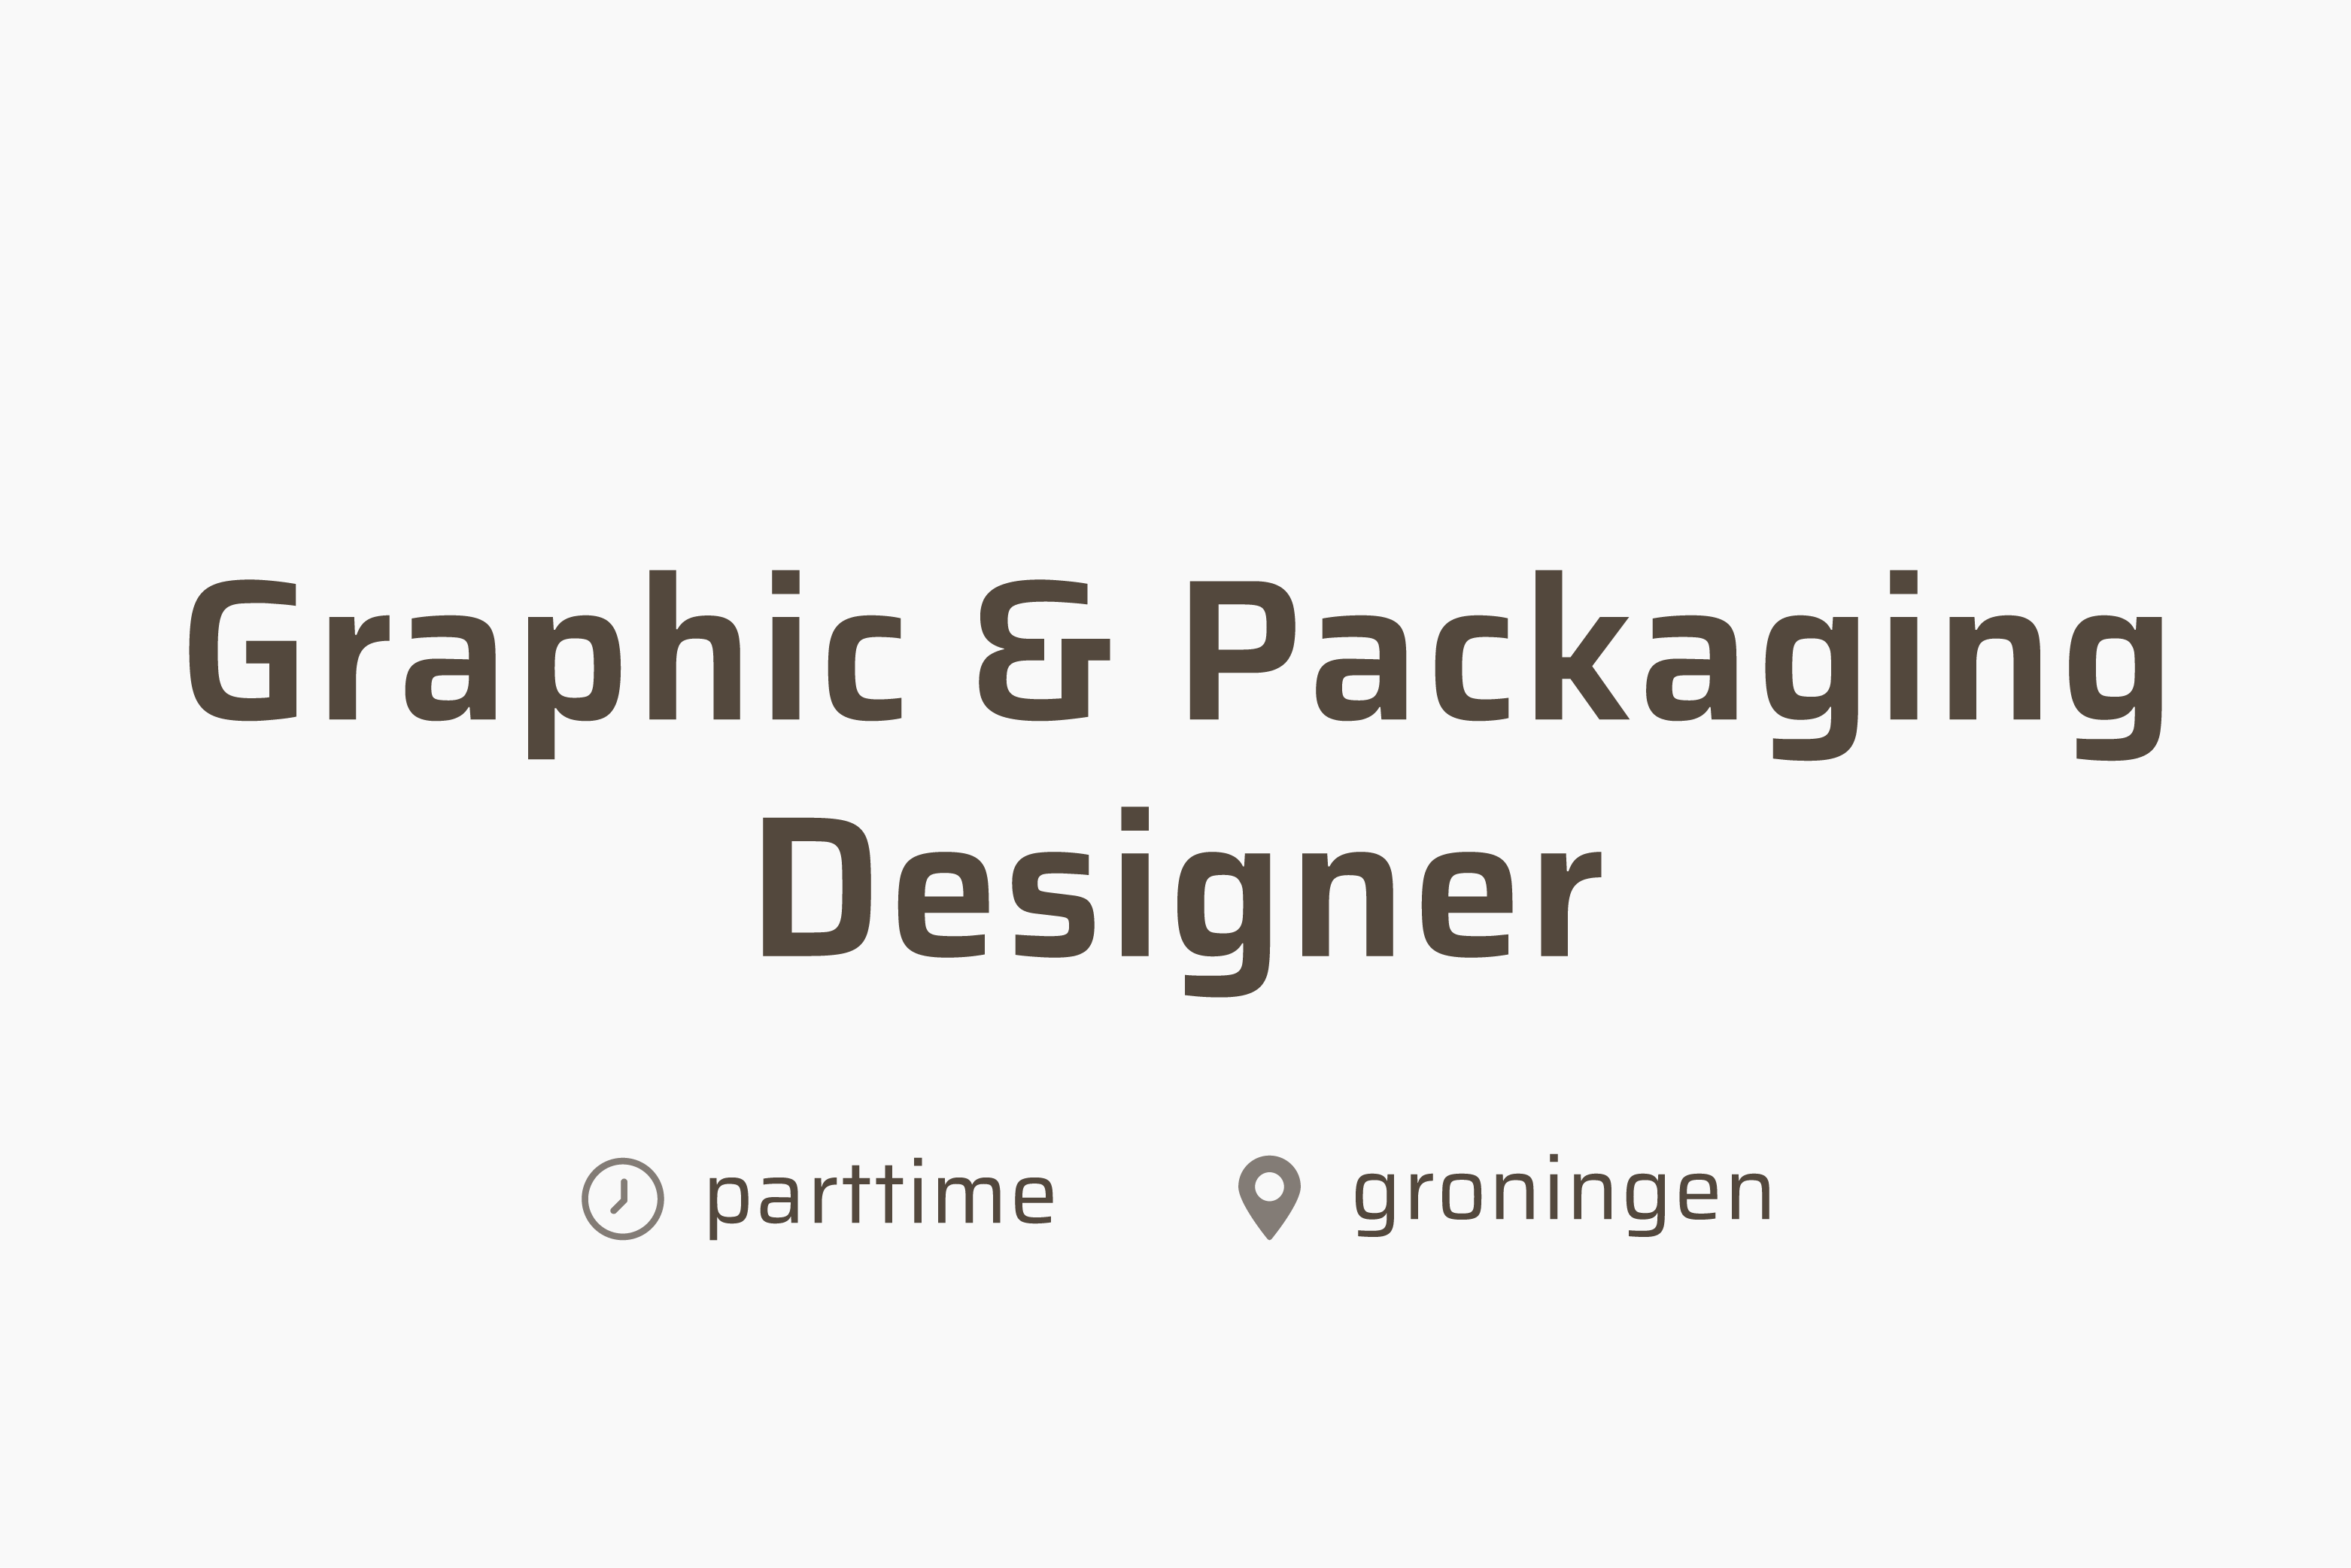 Vacature: Graphic & Packaging Designer (Parttime)